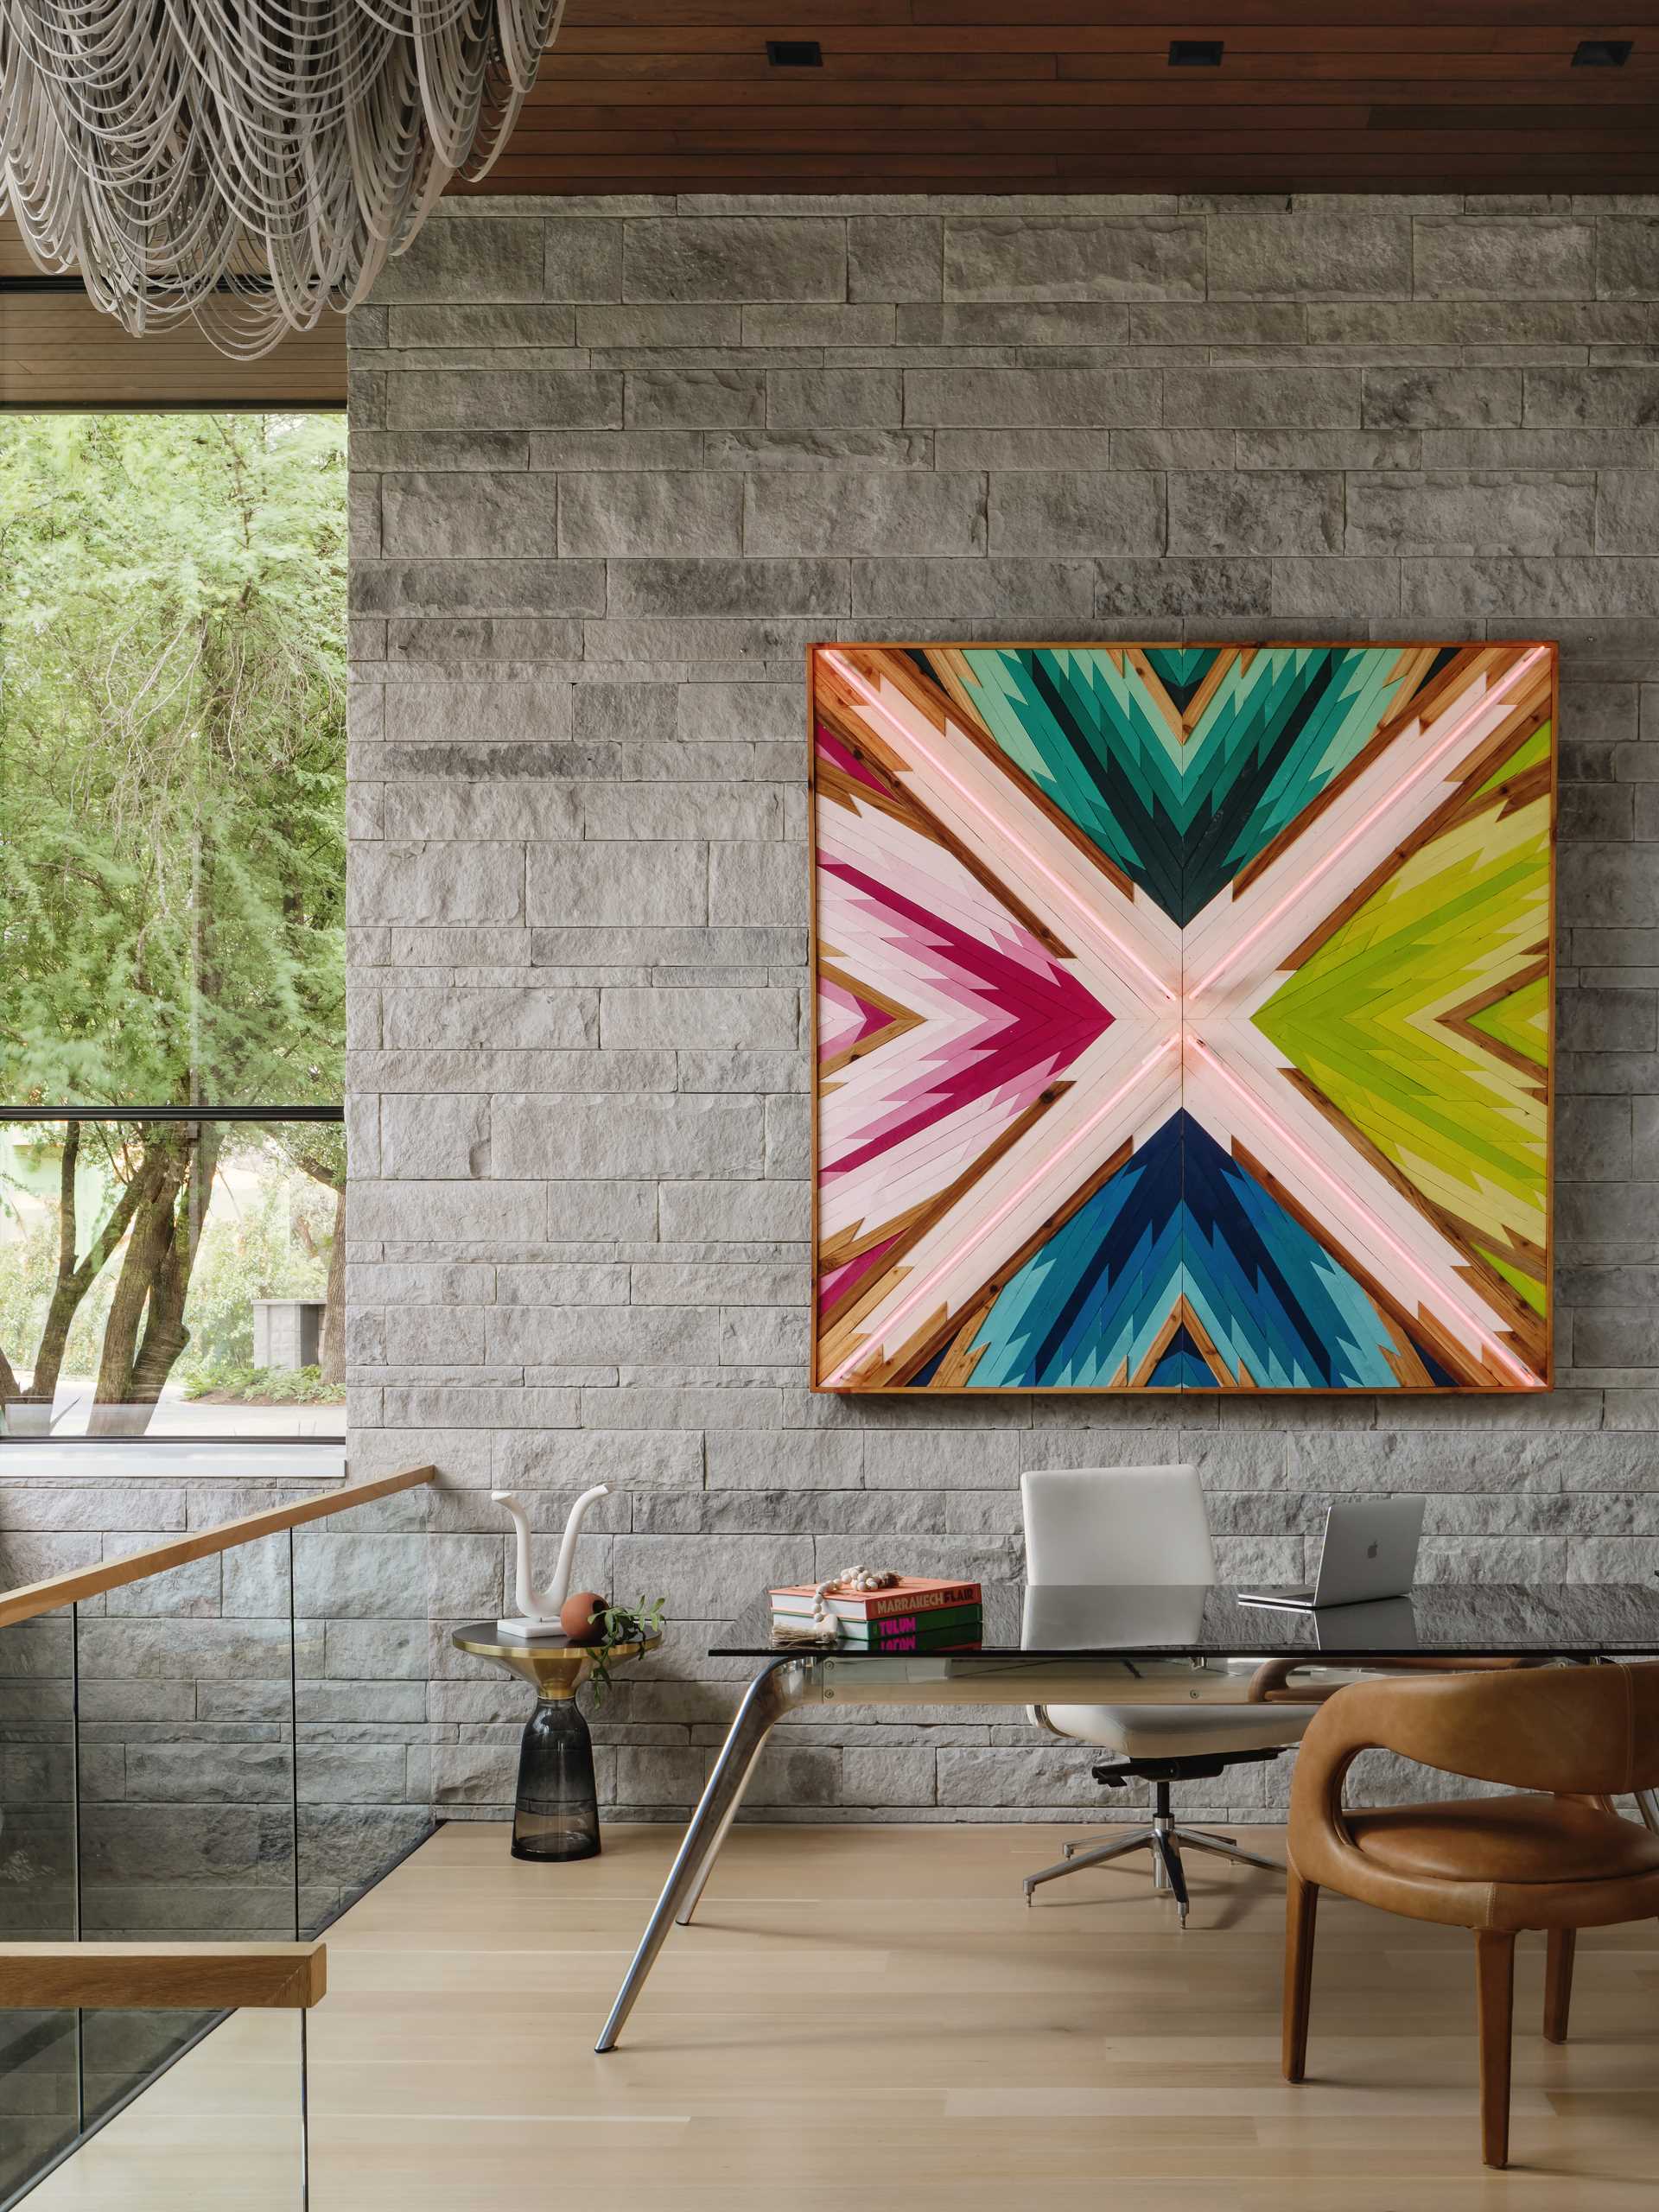 Bright and colorful artwork hangs on the wall in the home office.